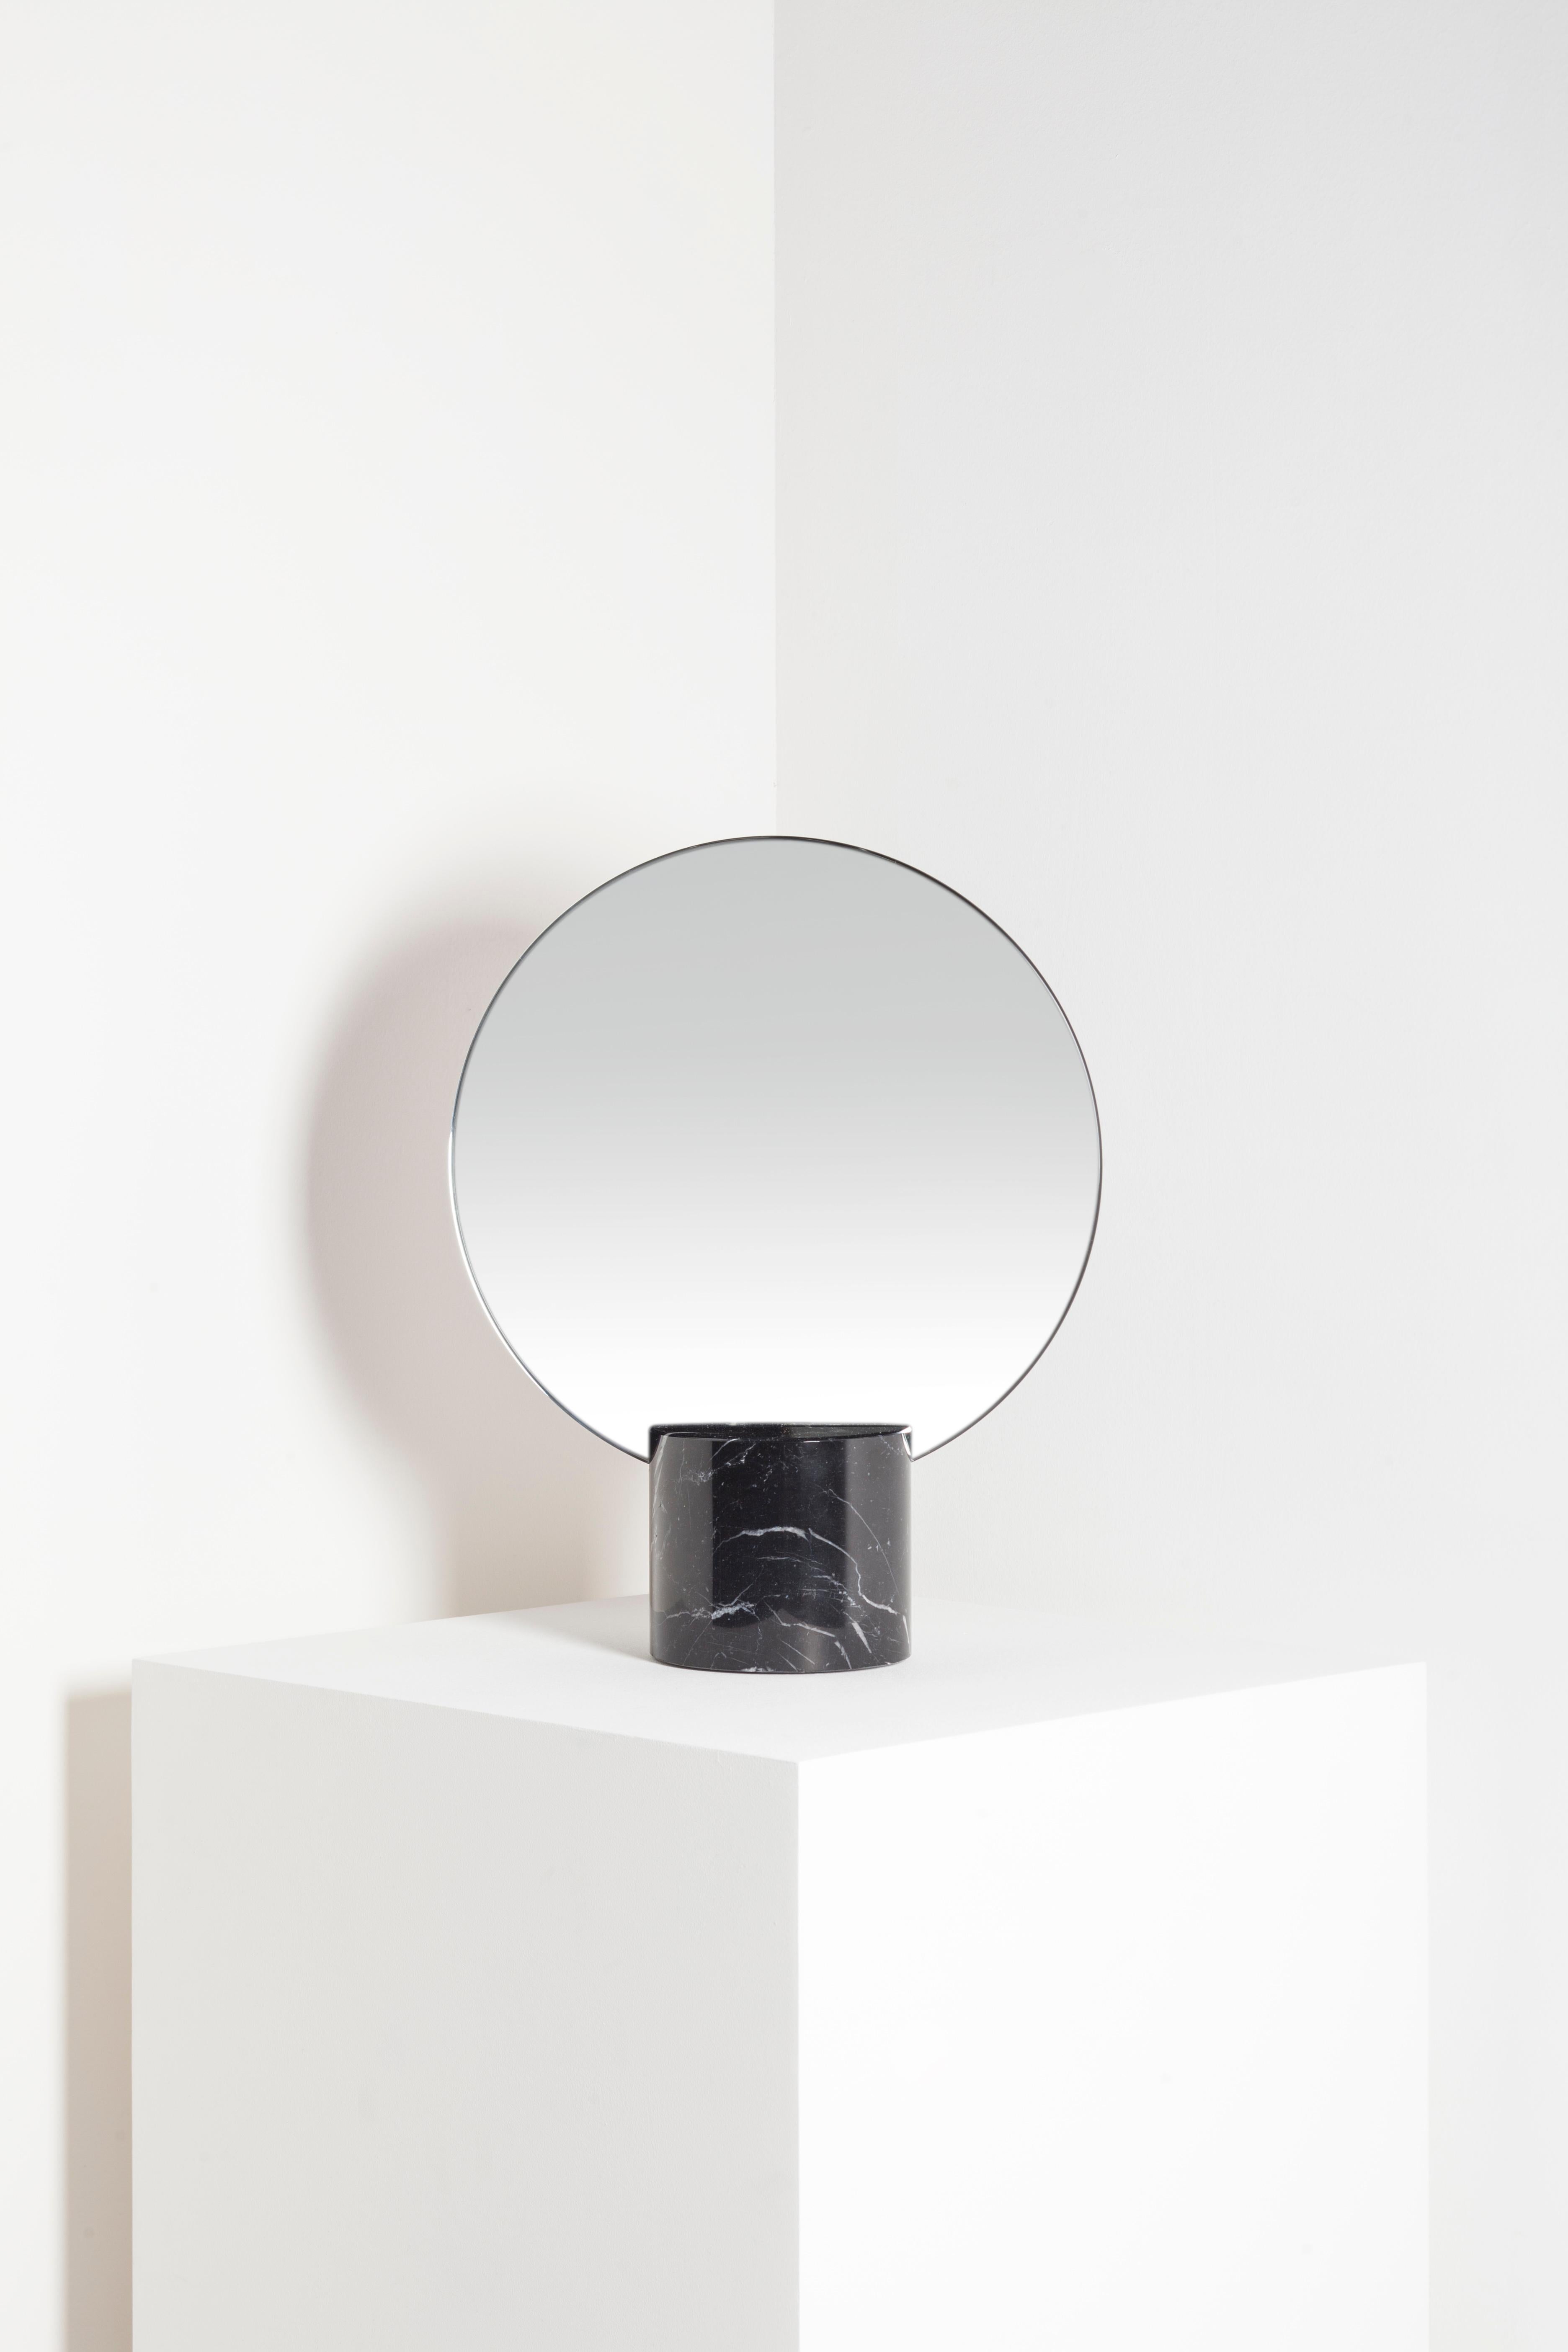 Sun mirror is a Minimalist style table mirror, made of marble and copper. It was inspired by the ancient civilizations of the Mediterranean area, where they develop the foundations of the concept of beauty that we have currently in Western culture.